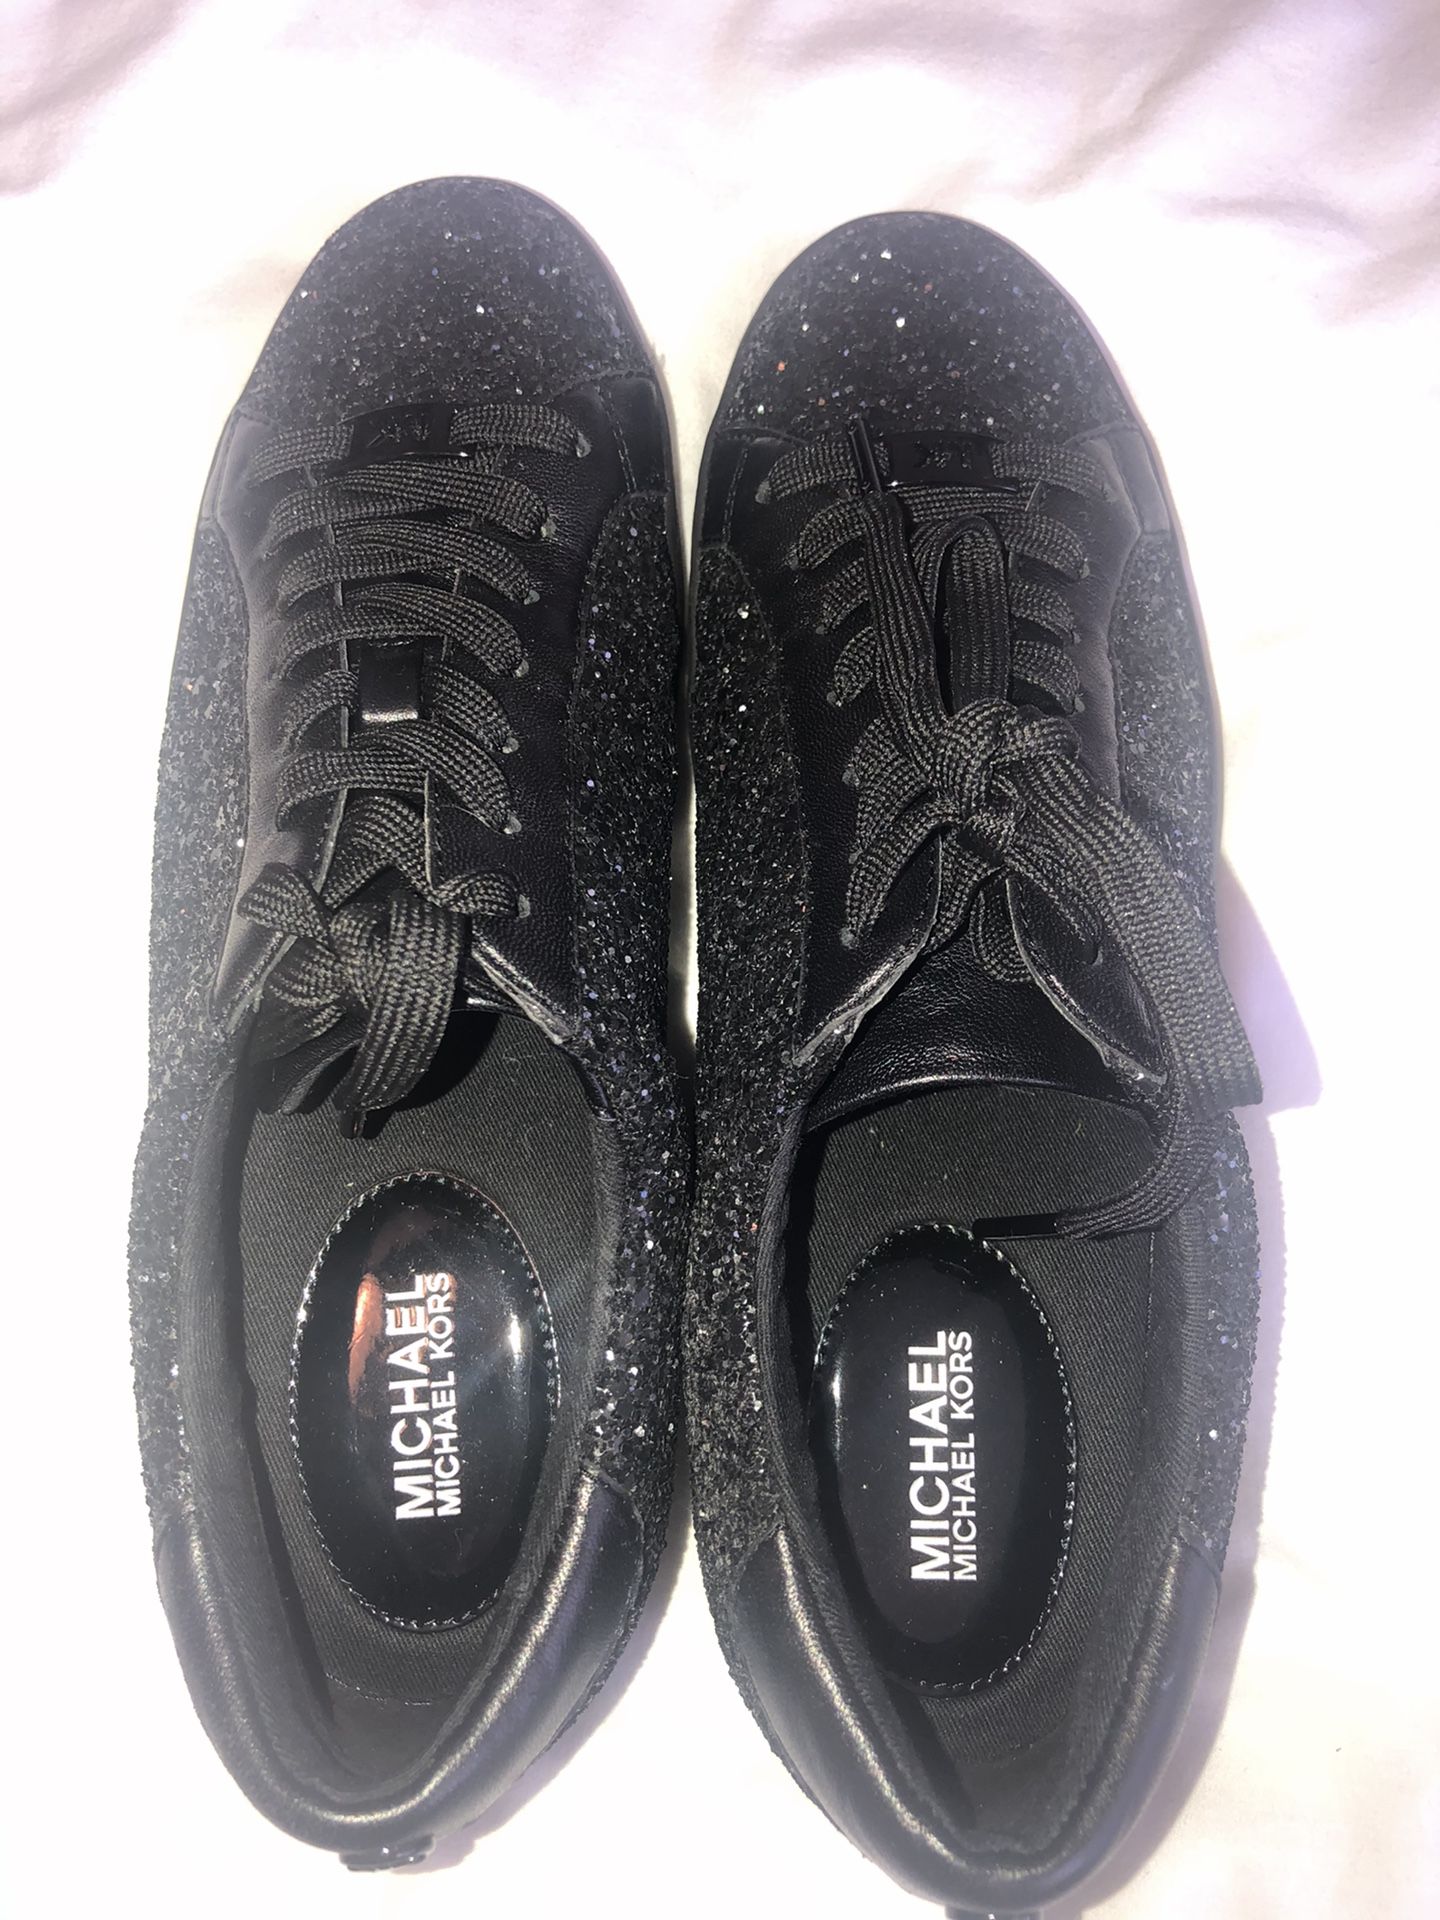 Michael Kors sparkly sneakers (size 40)